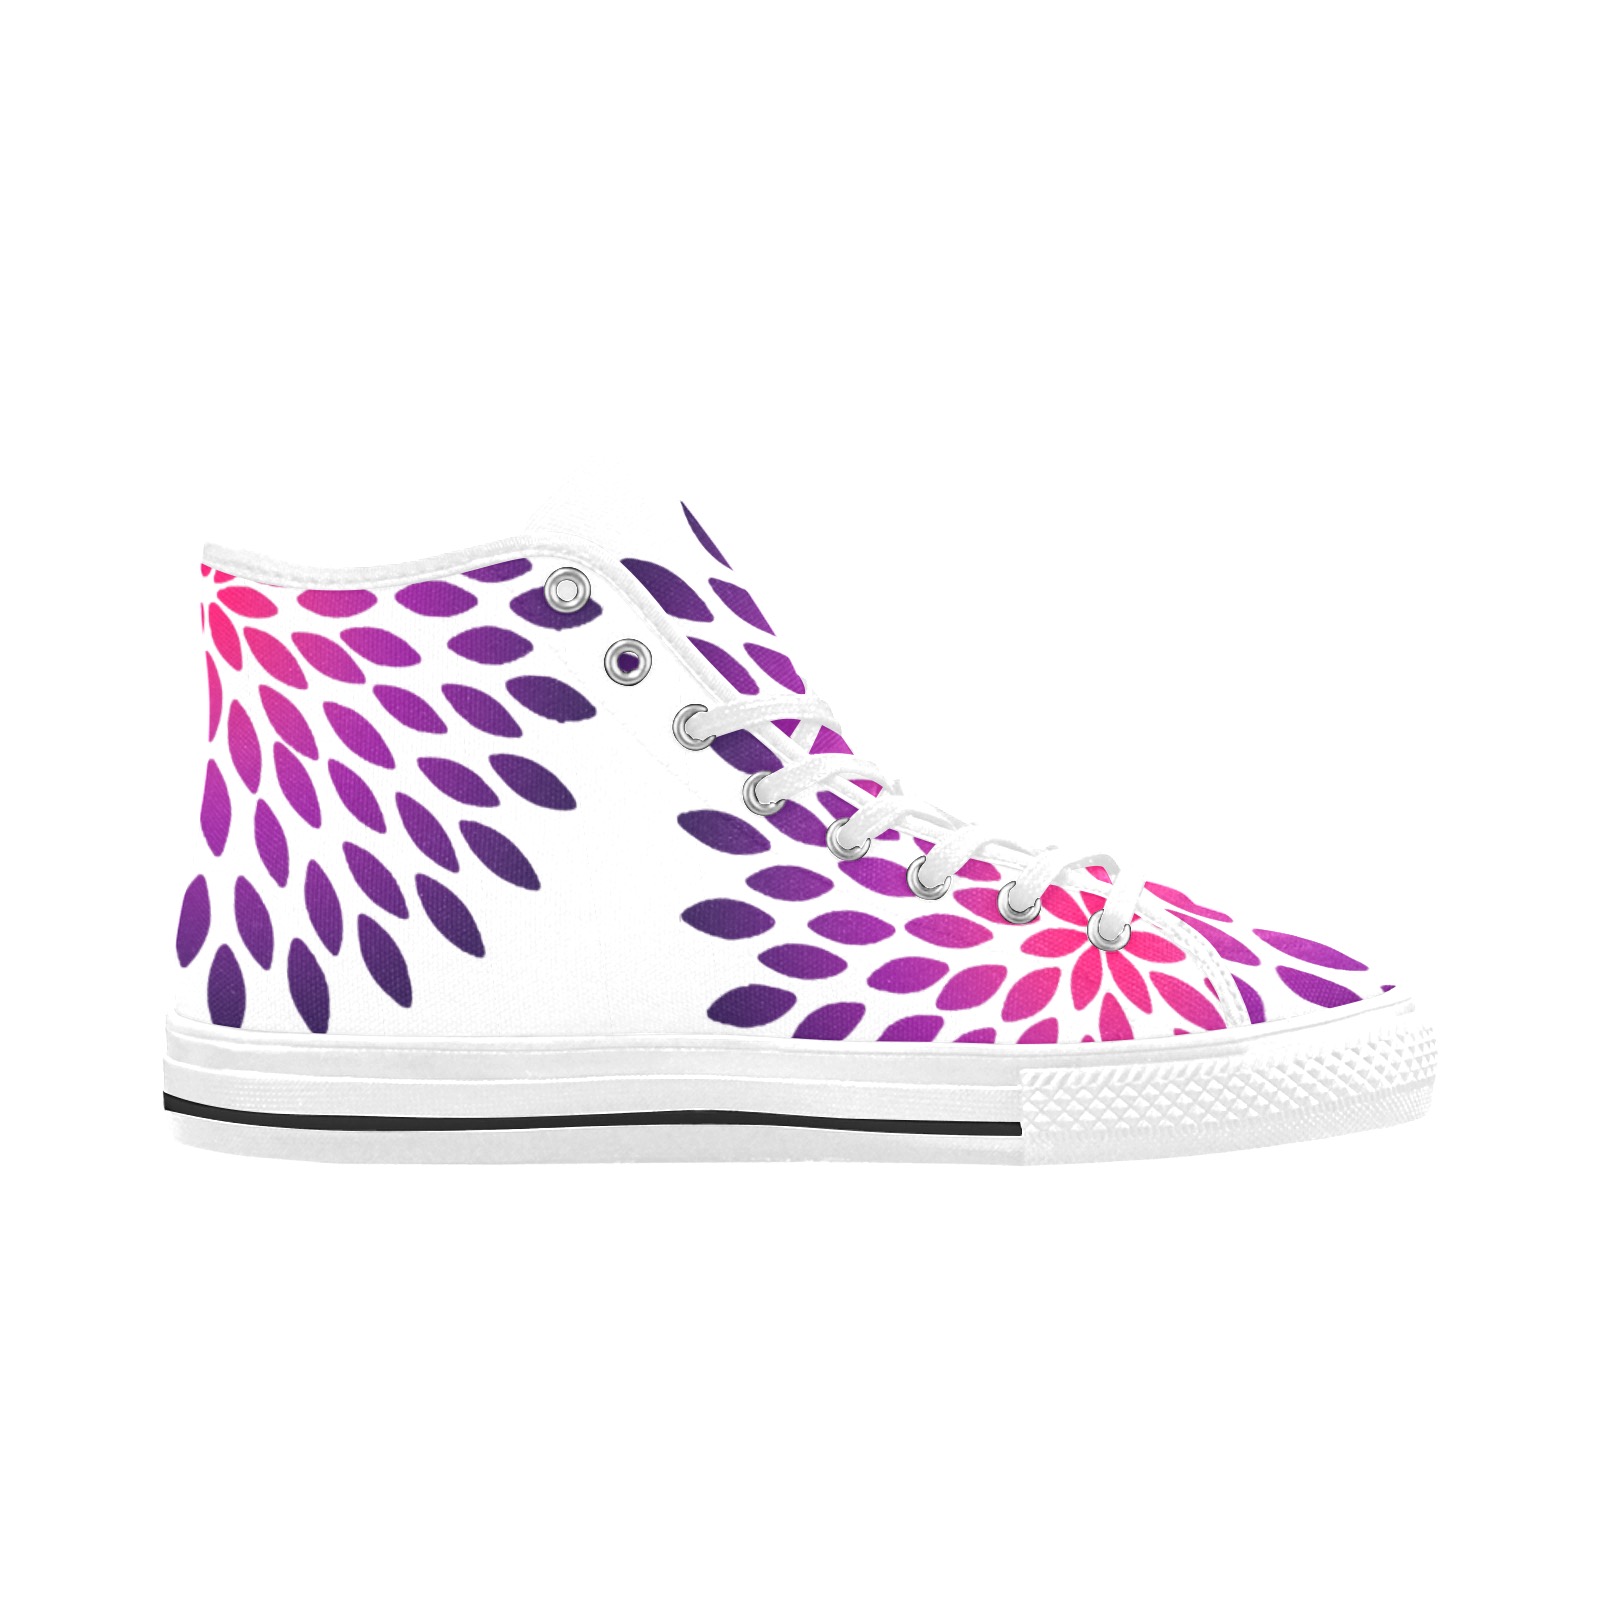 Ô Pink and Violet Zinnia on White Vancouver H Women's Canvas Shoes (1013-1)